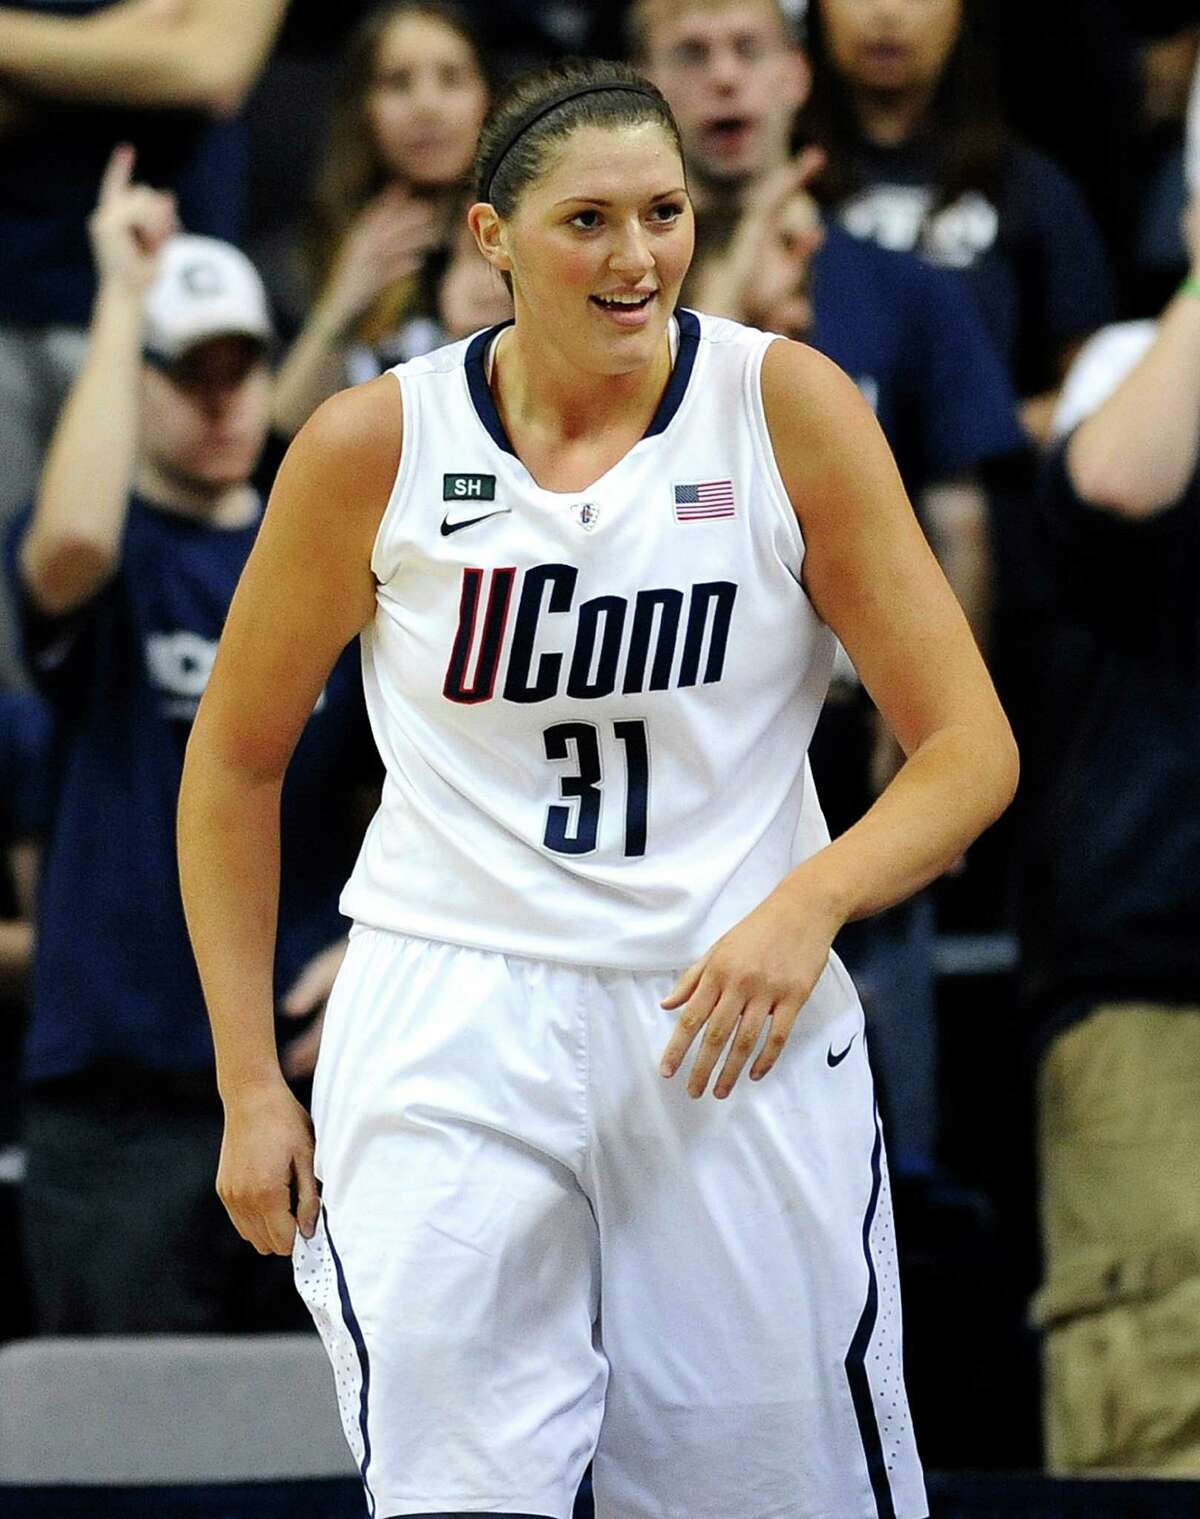 Connecticut's Stefanie Dolson reacts during the first half of an NCAA college basketball game in Storrs, Conn., Sunday, Feb. 10, 2013. Dolson had 22 points in the first half. (AP Photo/Jessica Hill)